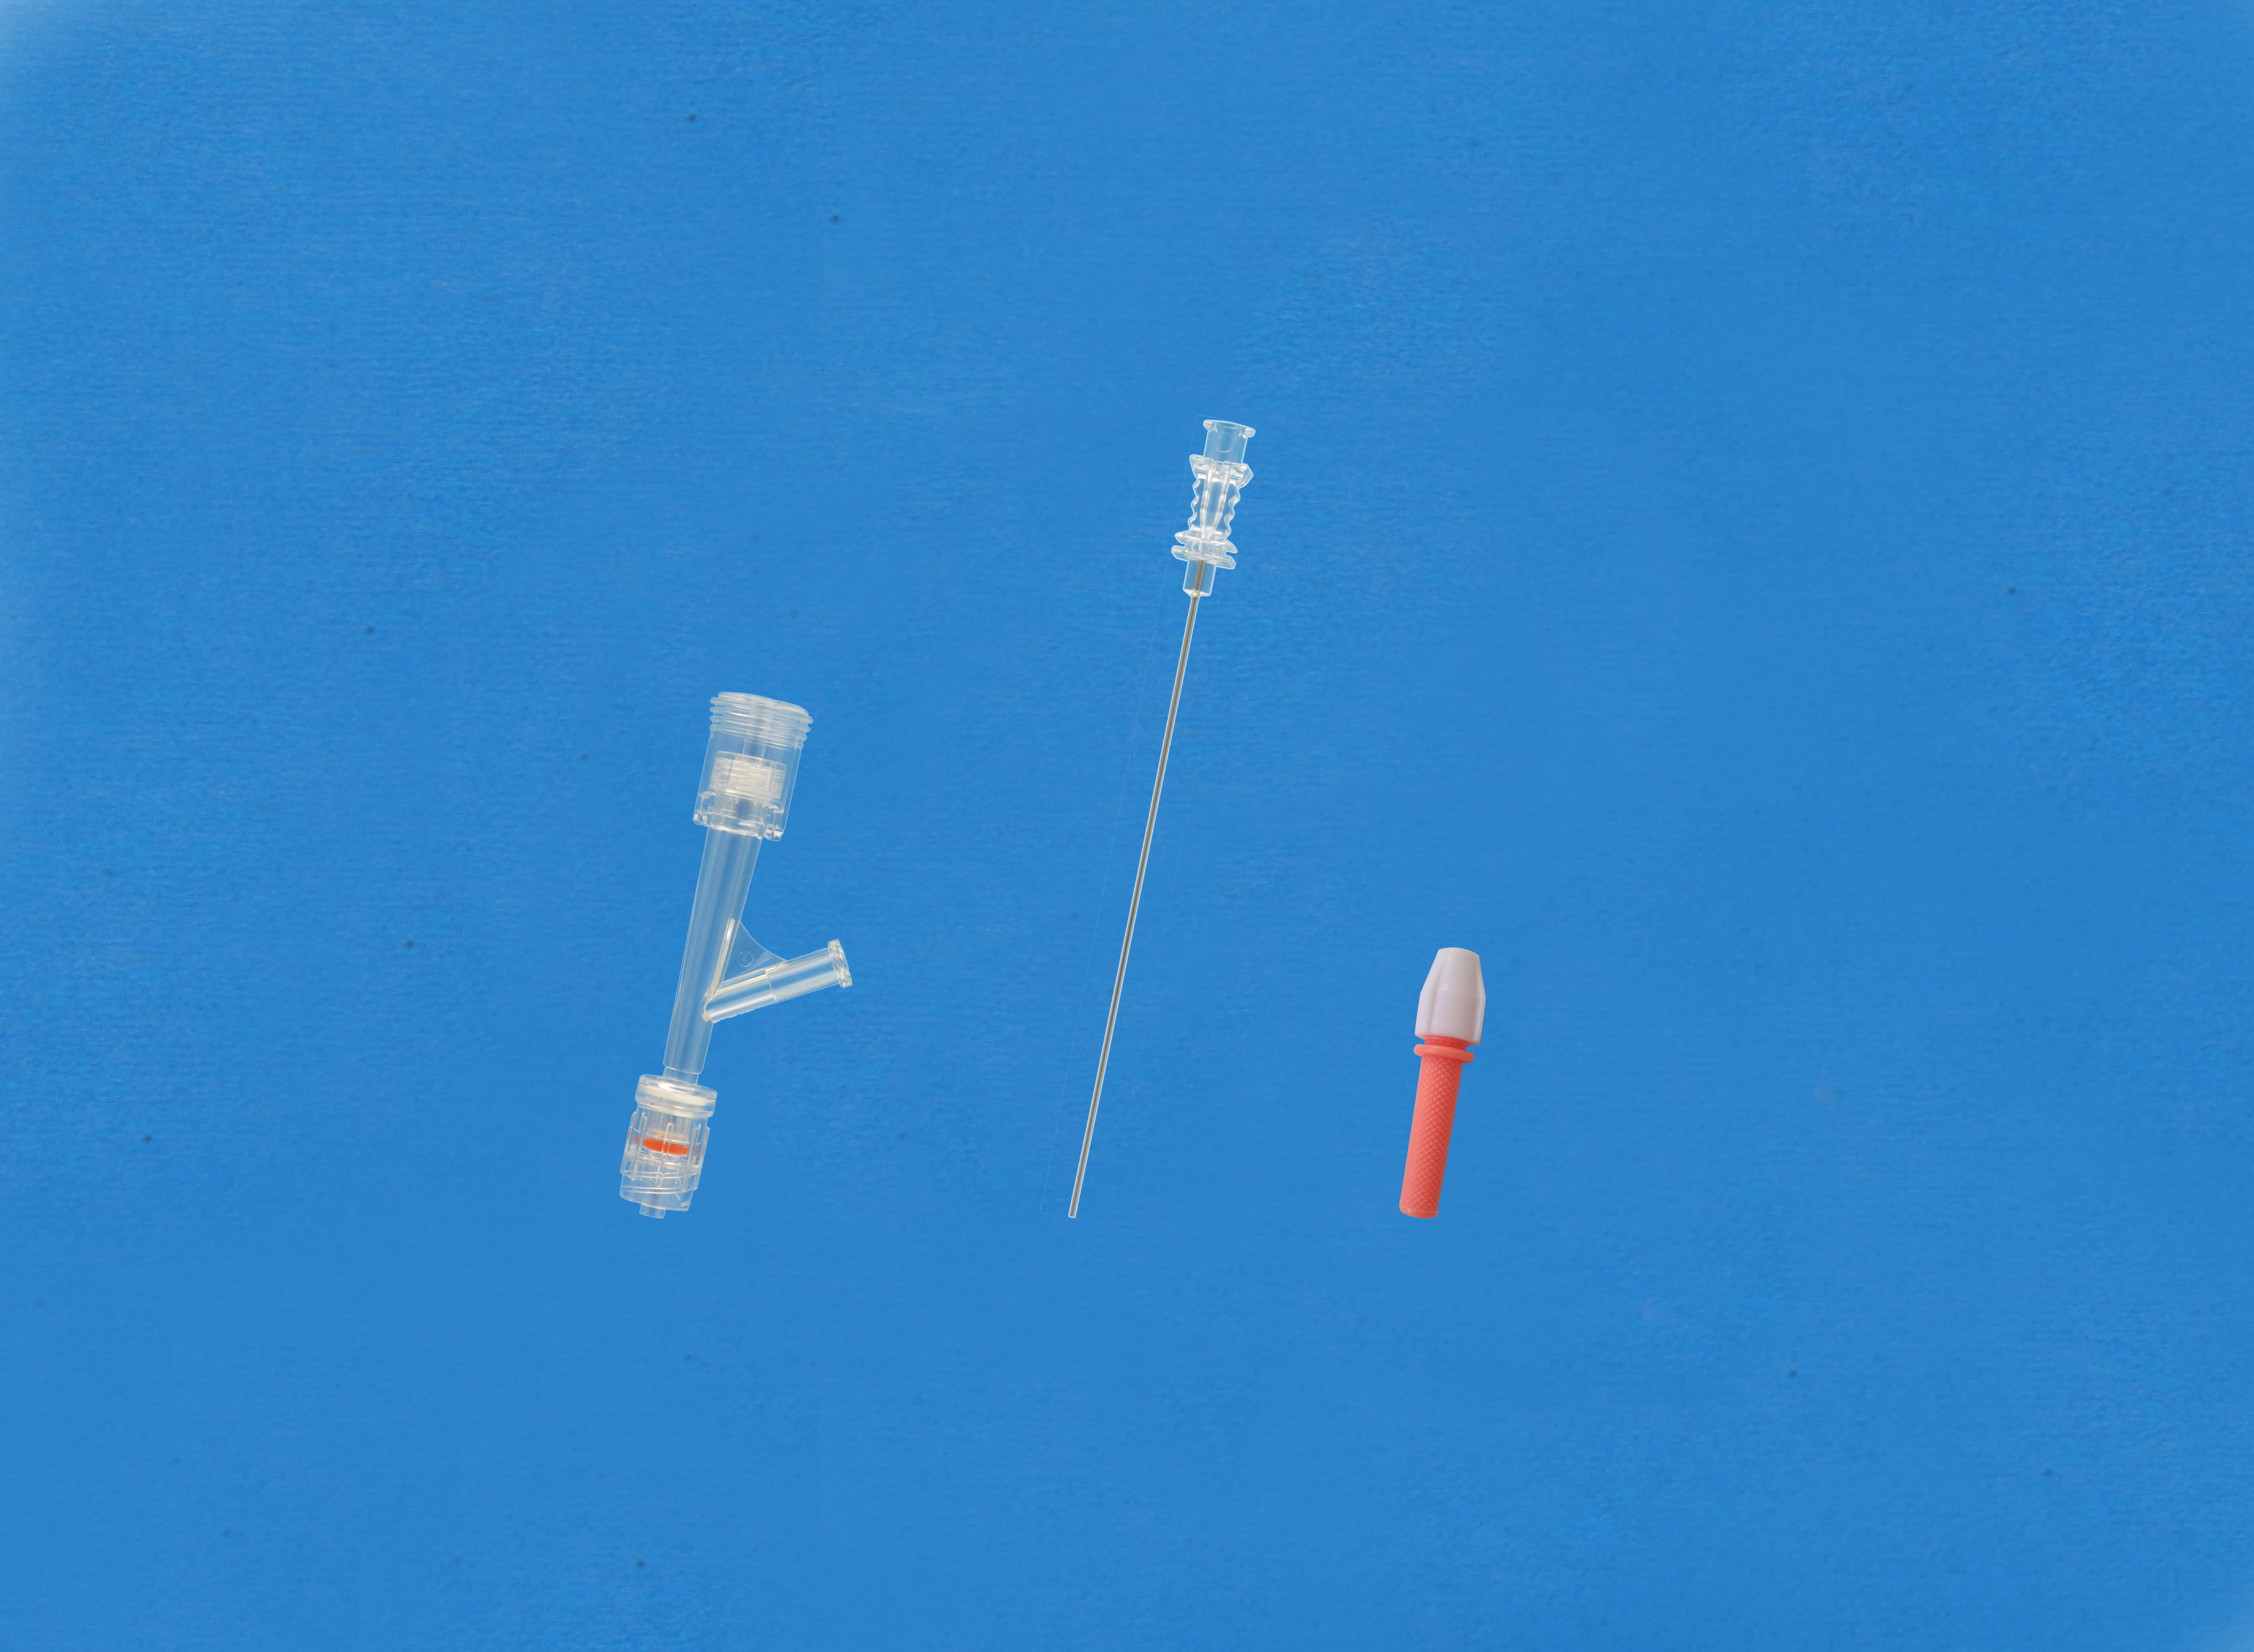 Haemostatic valves, Push-pull, Sideon Female Luer, Insertion Tool with Large Hub, Red/Copper Torquer